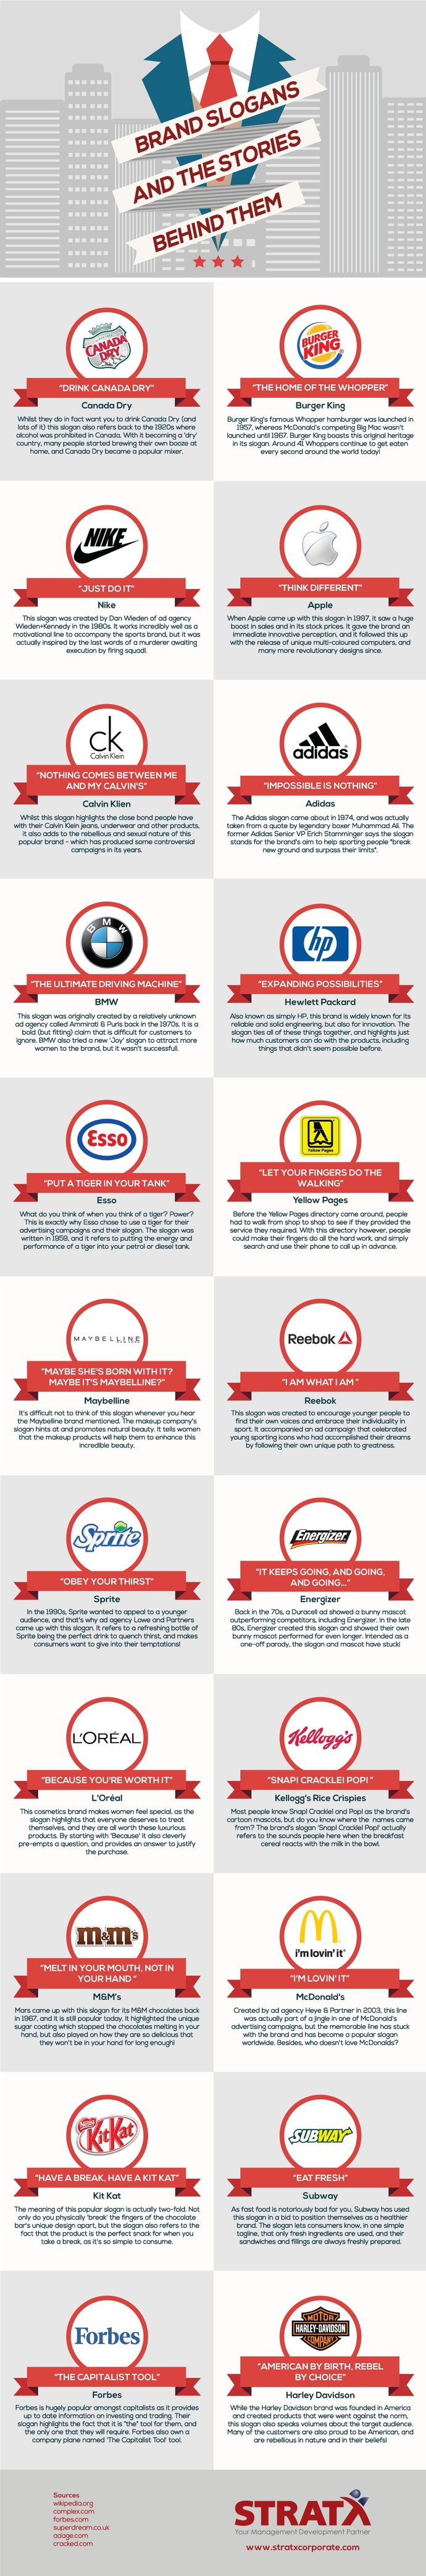 famous slogans and logos